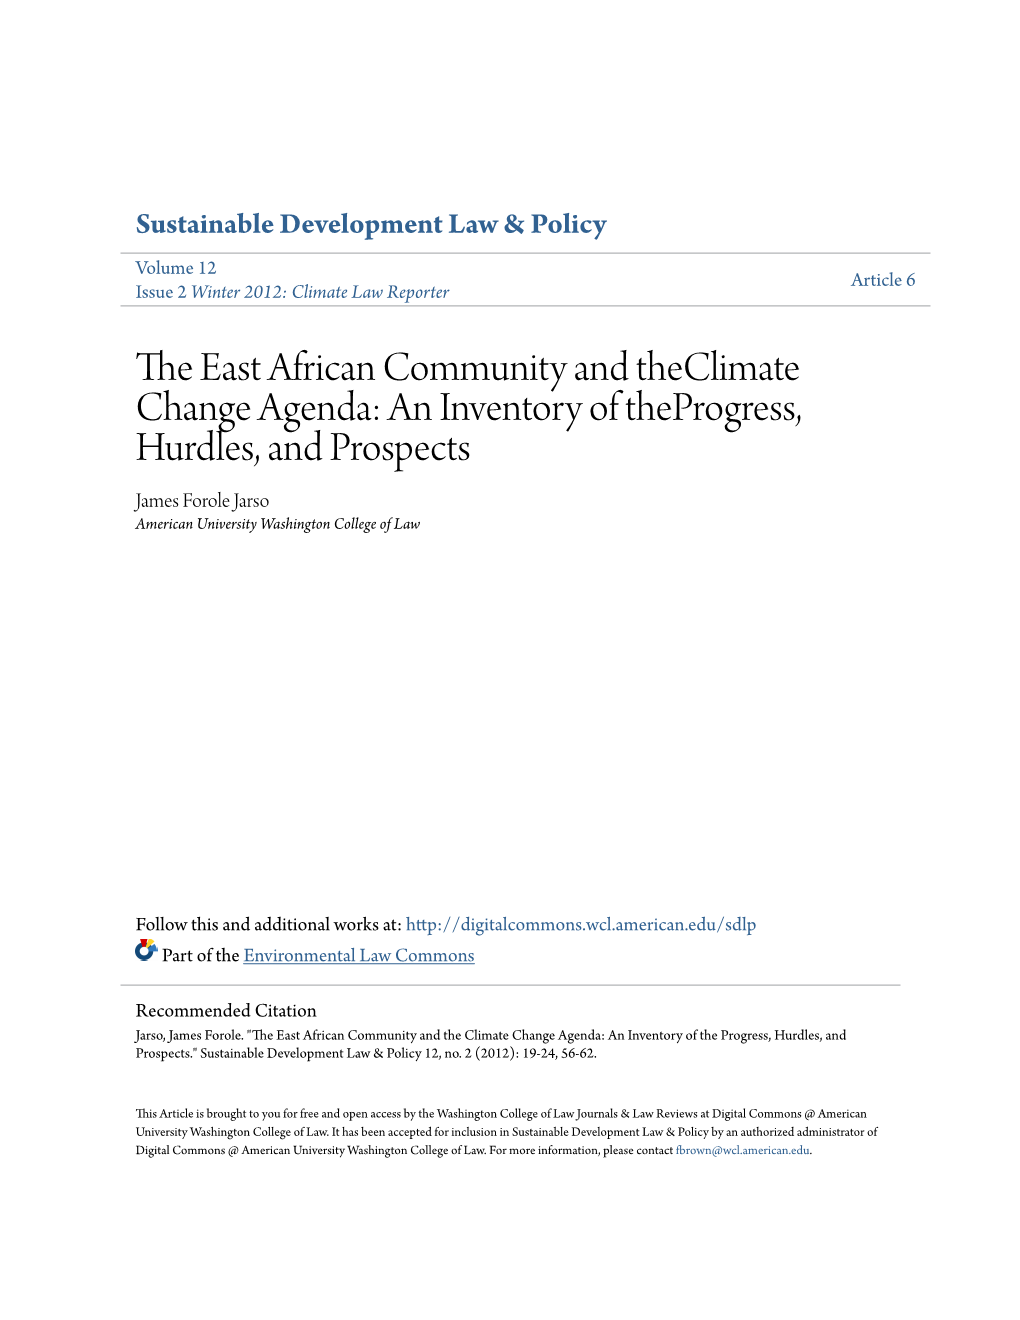 The East African Community and Theclimate Change Agenda: An